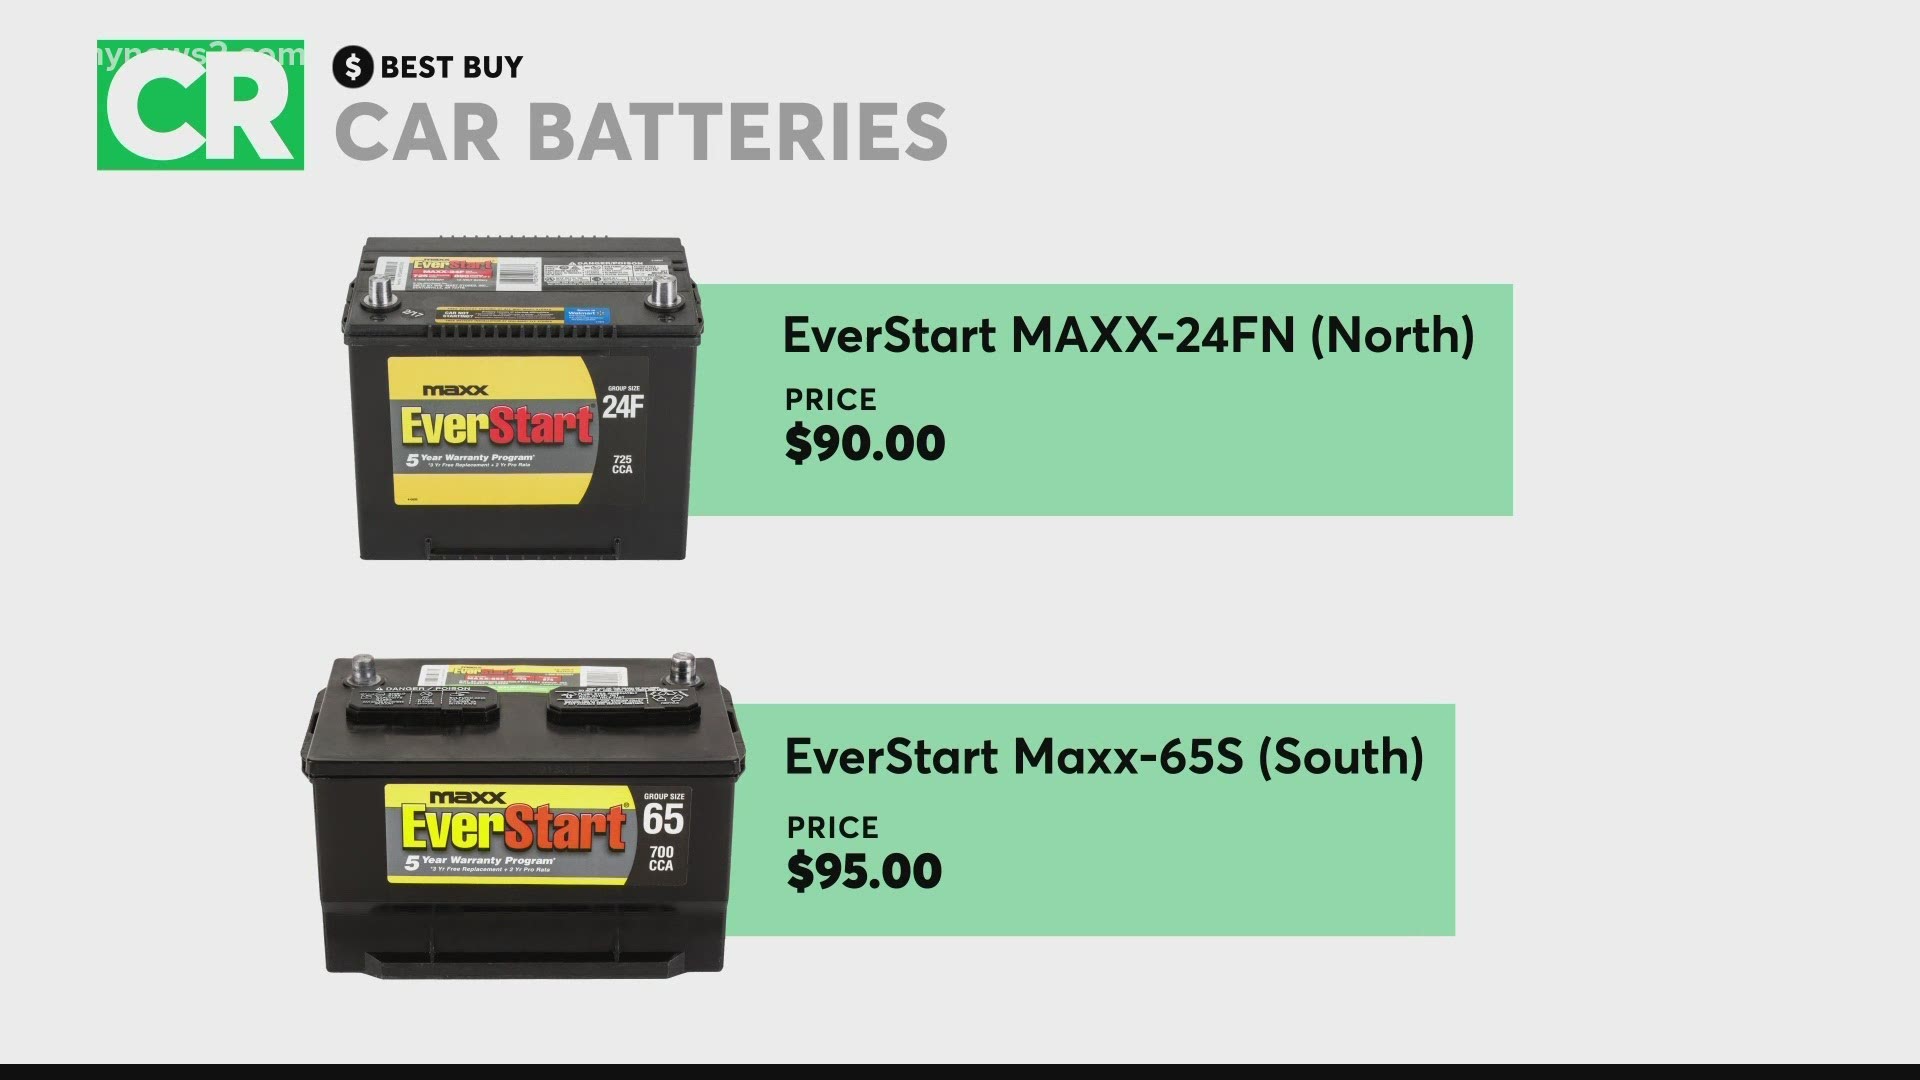 Follow these steps to make your car battery is as fresh as possible.